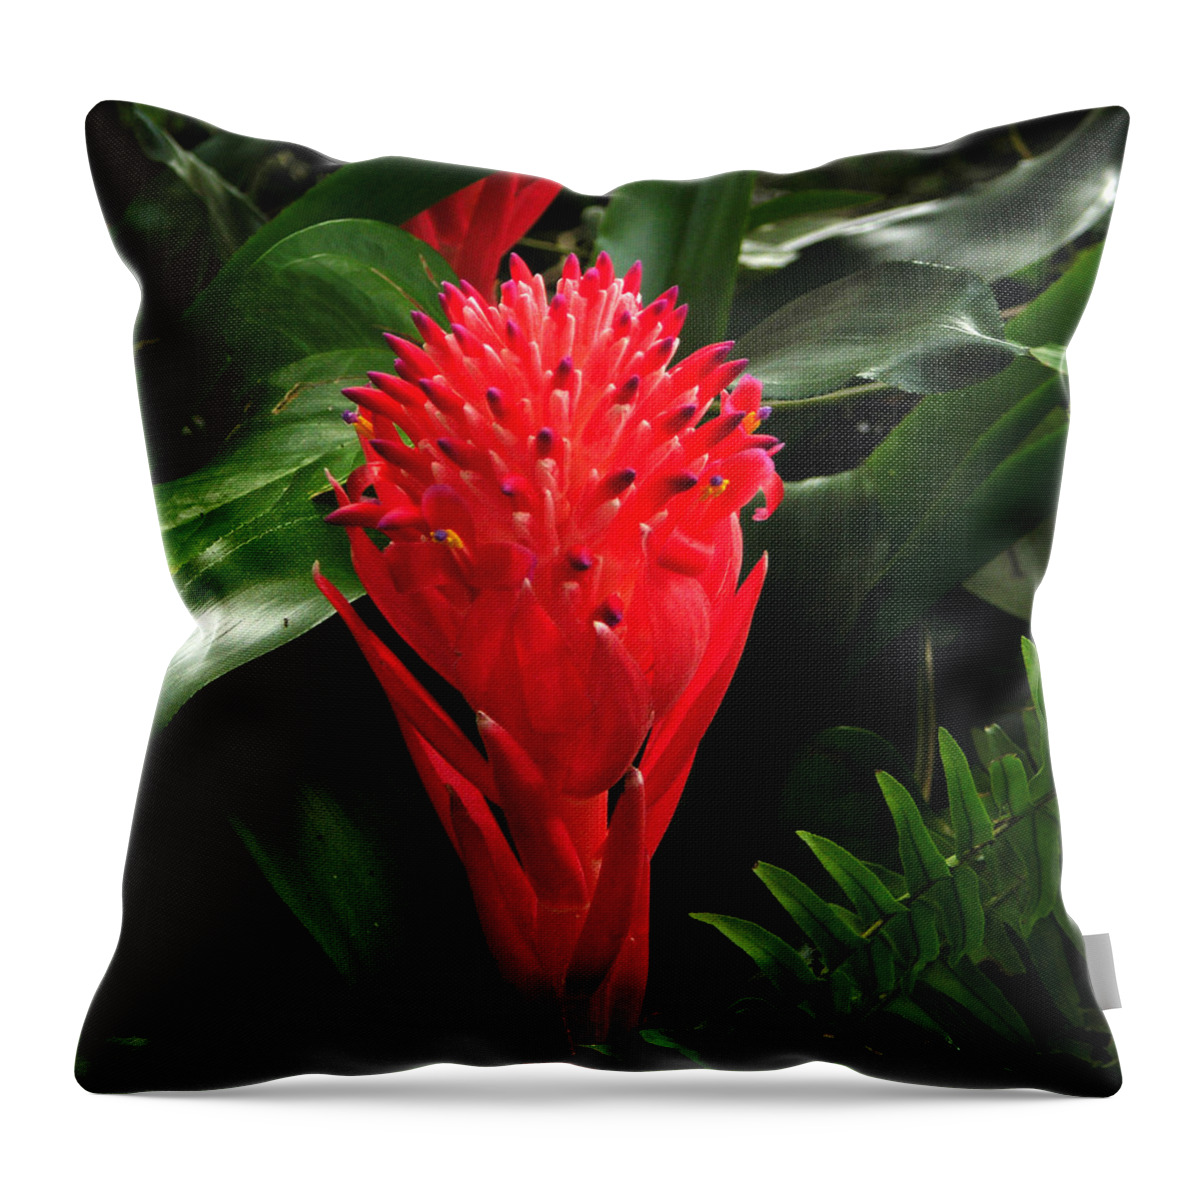 Bromeliad Throw Pillow featuring the photograph Bromeliad 9-18-15 by Julianne Felton